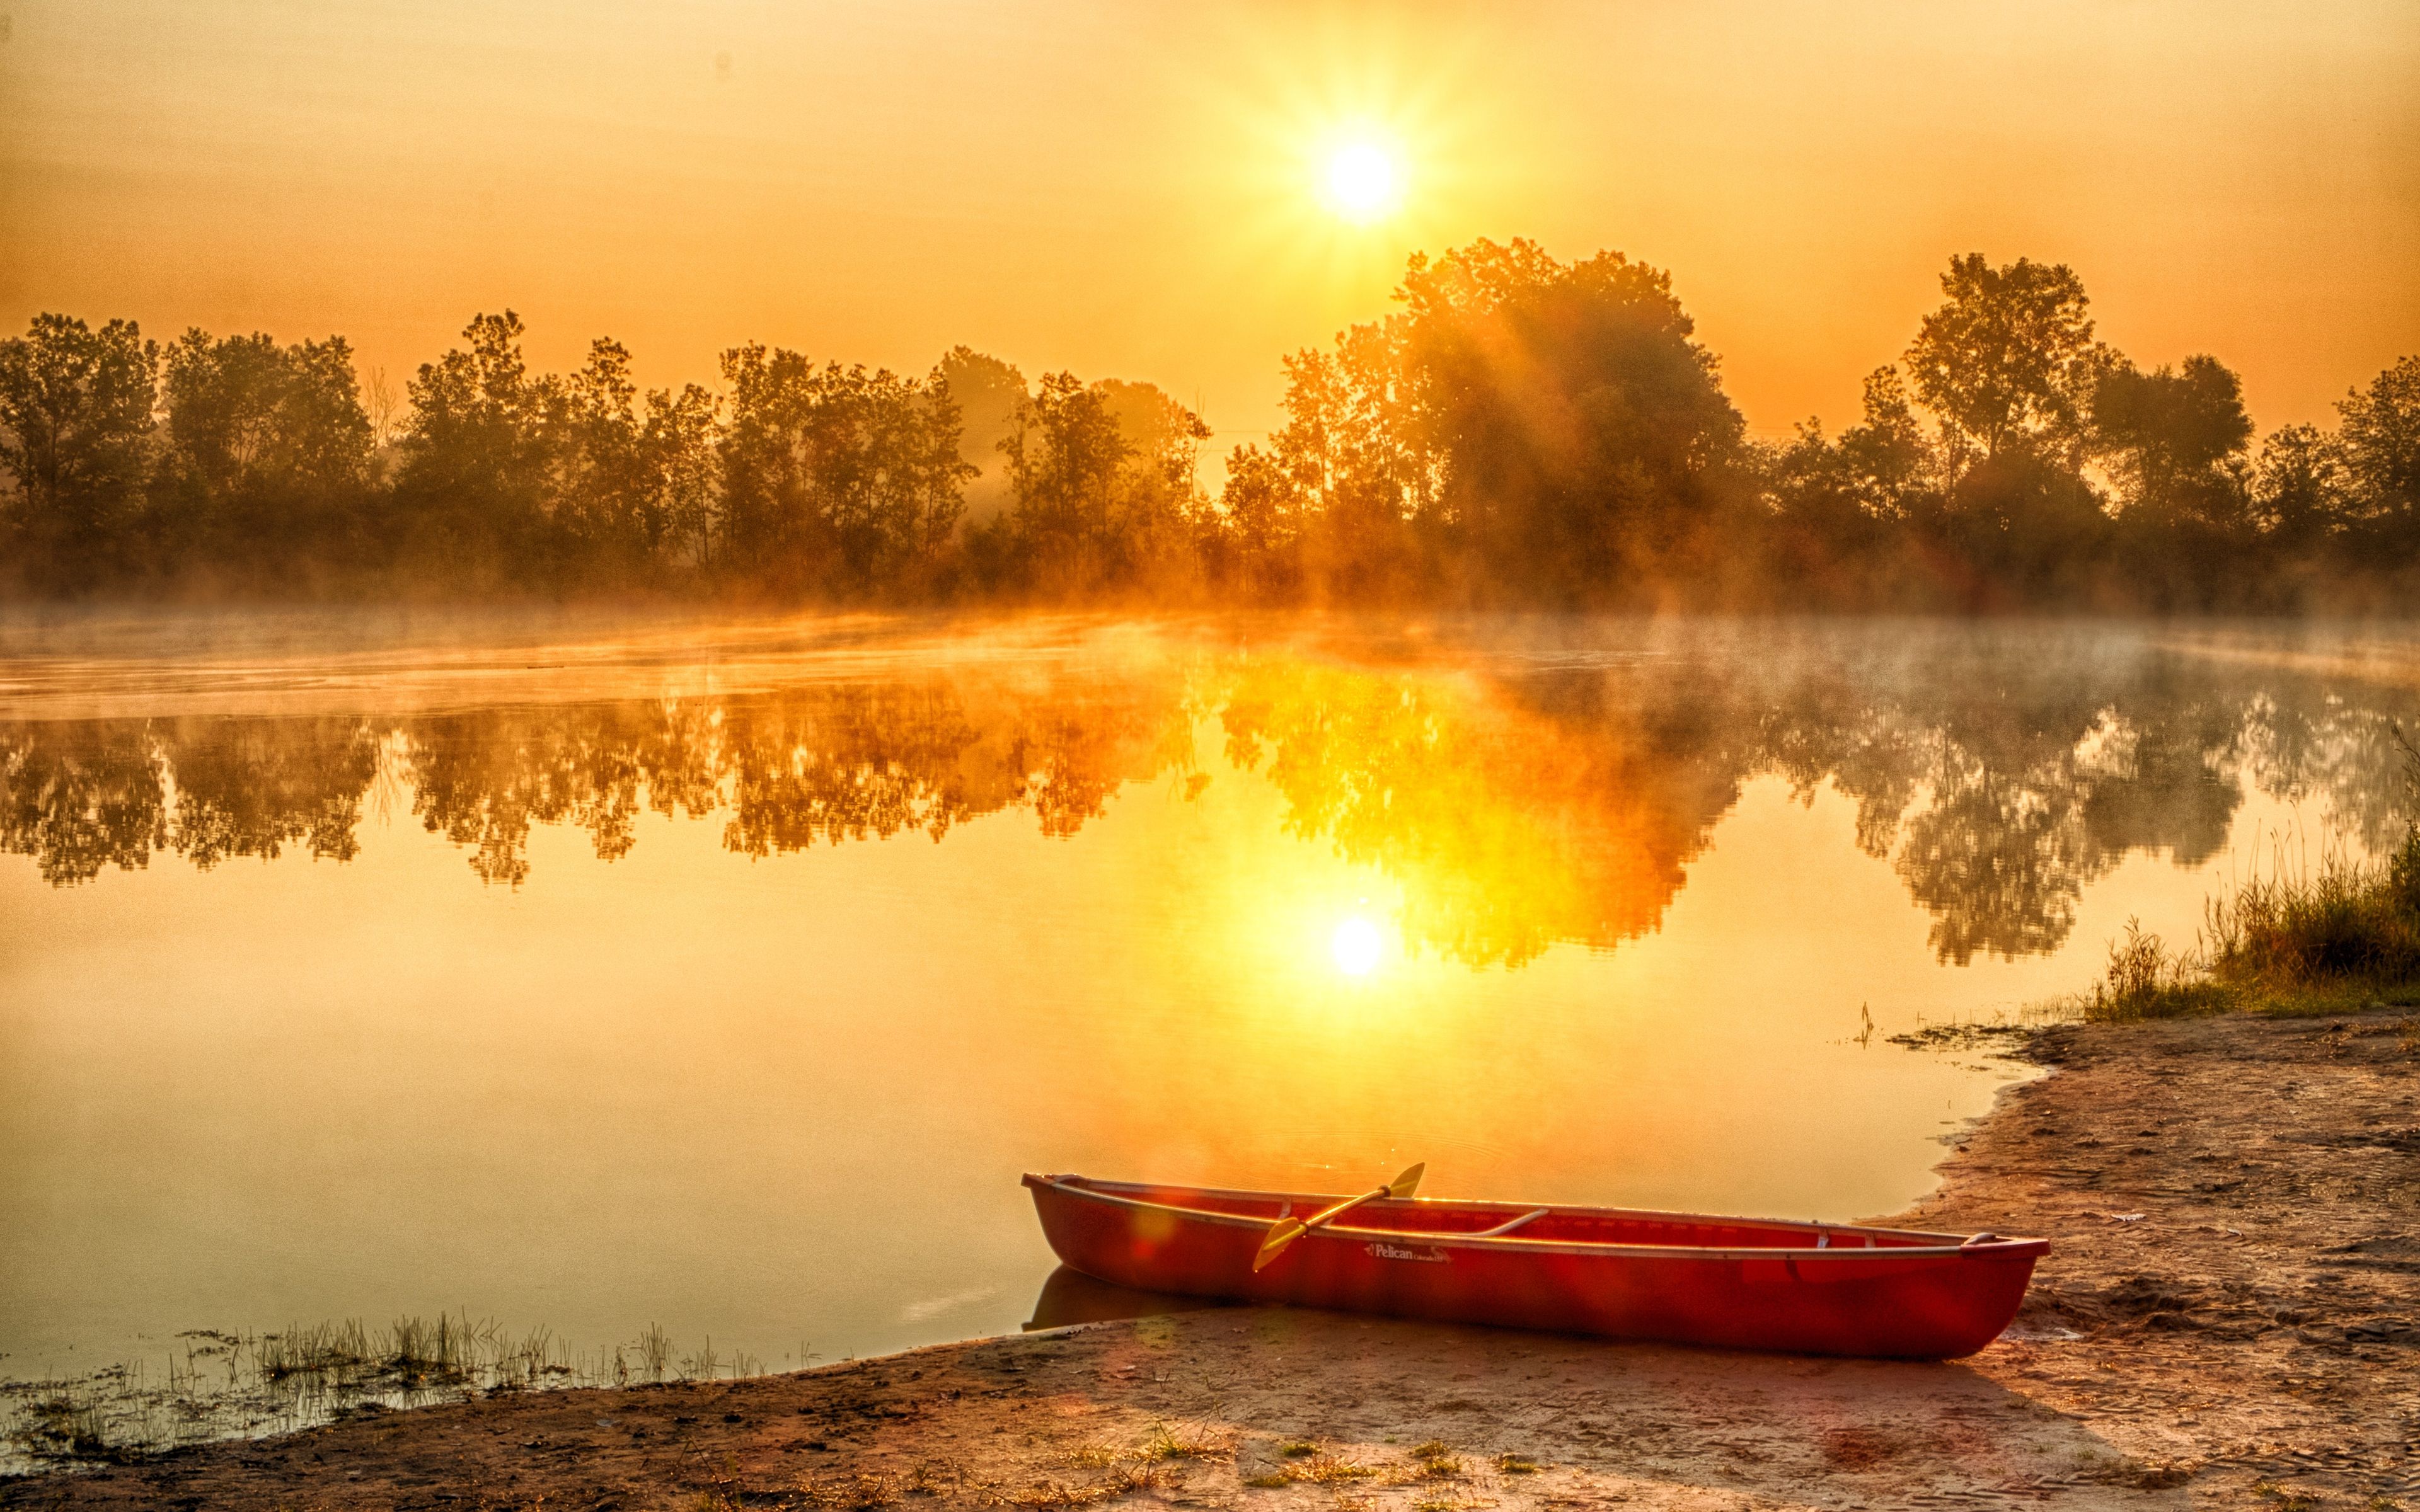 A canoe docked on the edge of a lake with the sun reflected in the water.